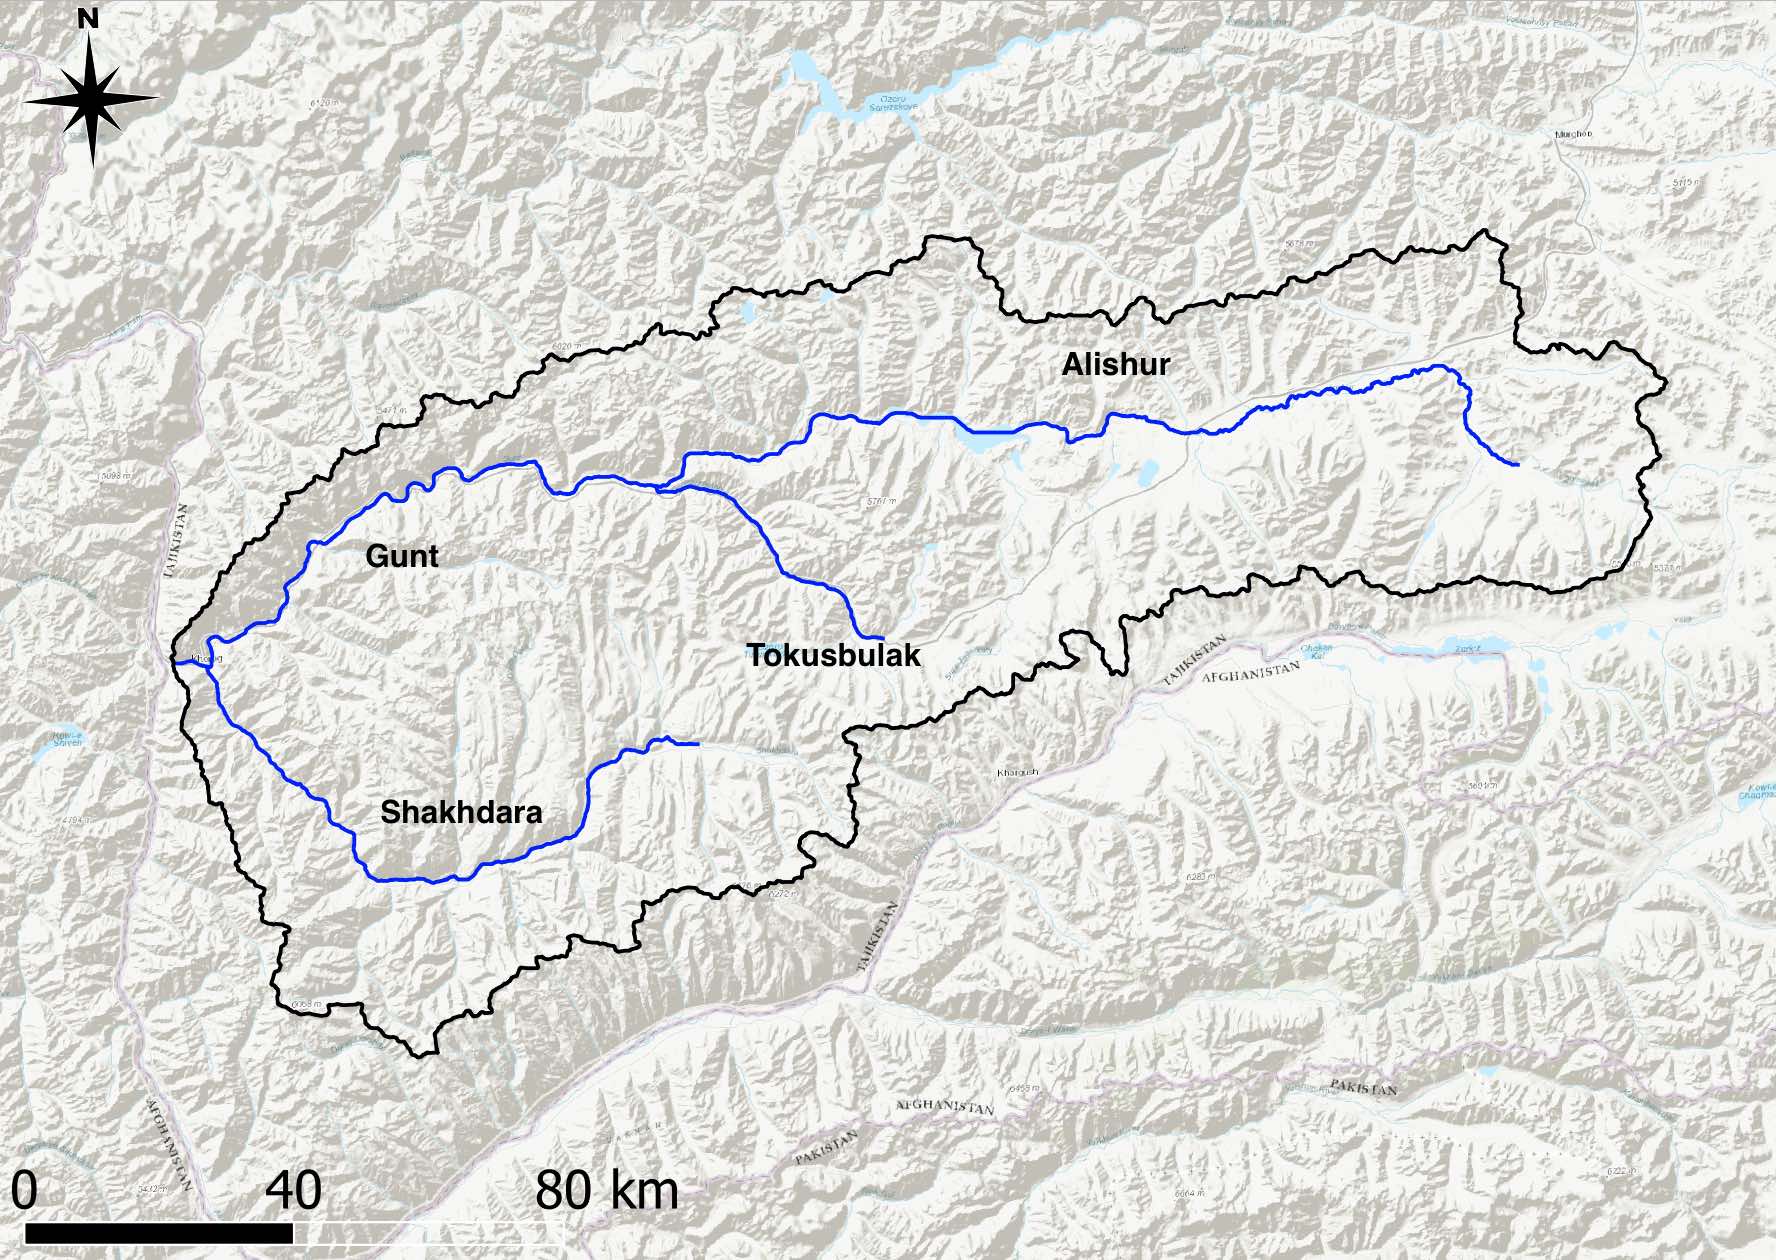 The outline of the Gunt river catchment is shown with the key river sections of all tributariies from the corresponding subbasins.